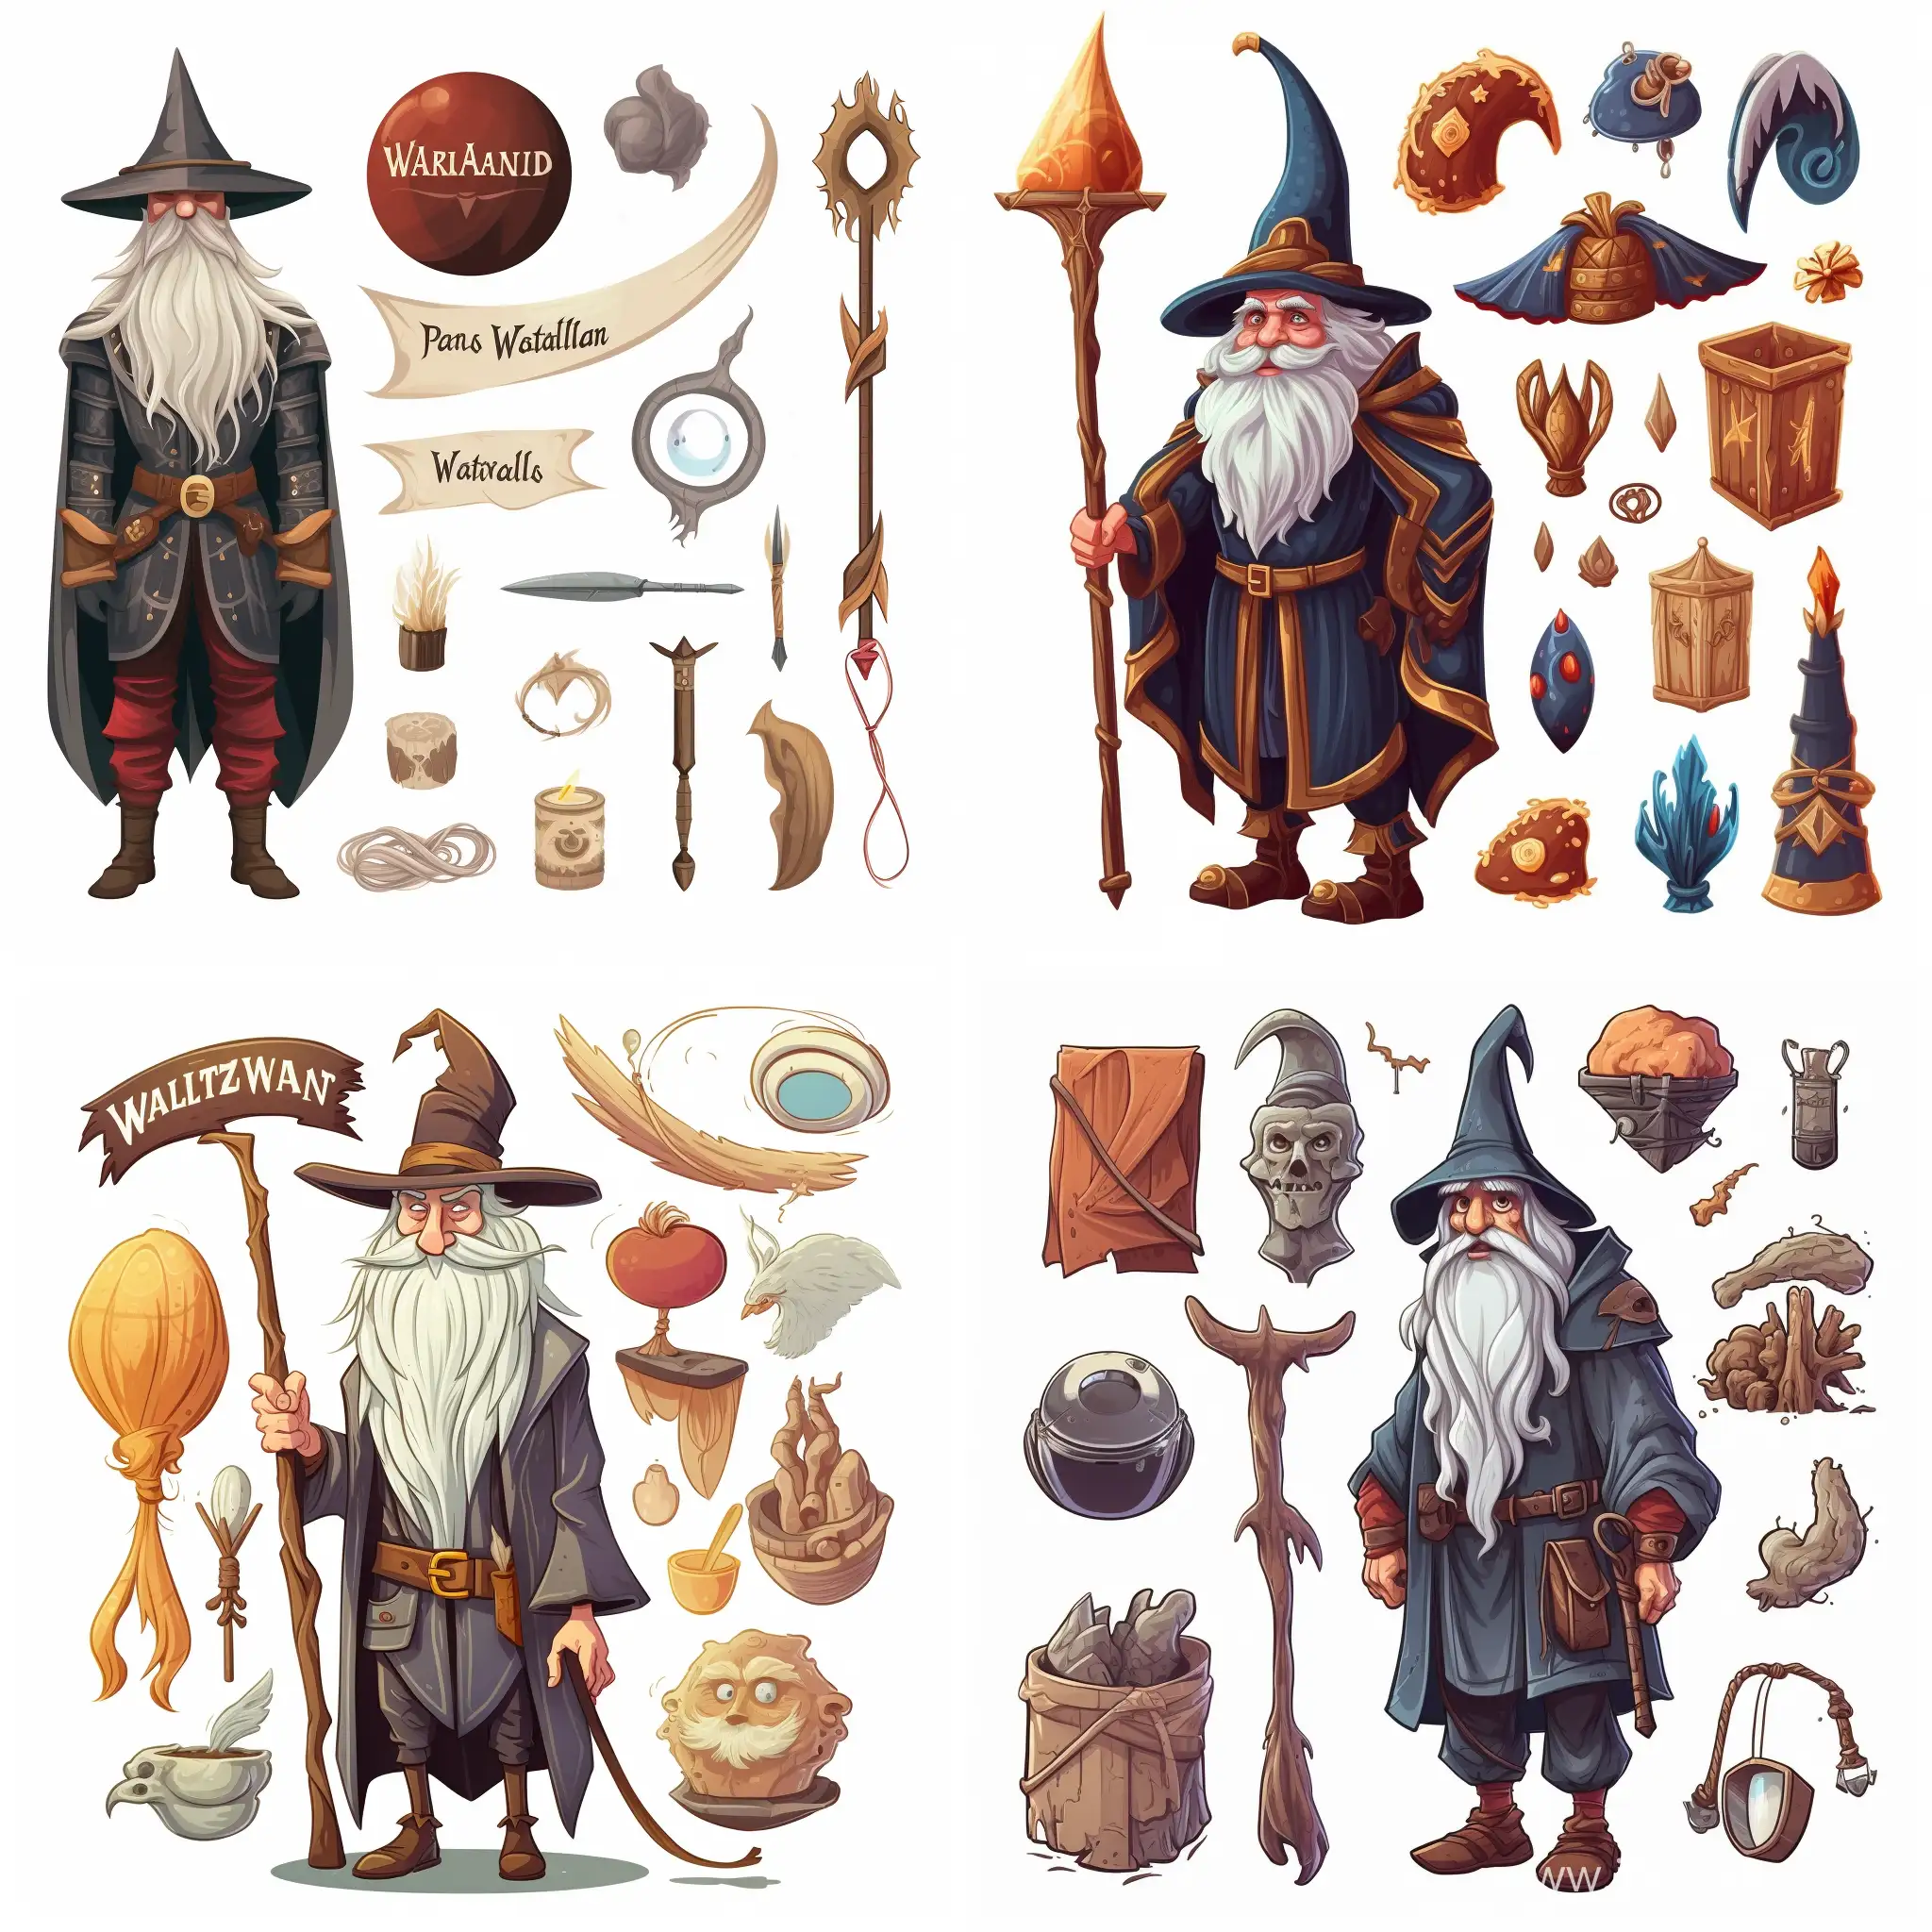 Whimsical-Wizard-with-Magical-Charm-Cartoon-Style-Image